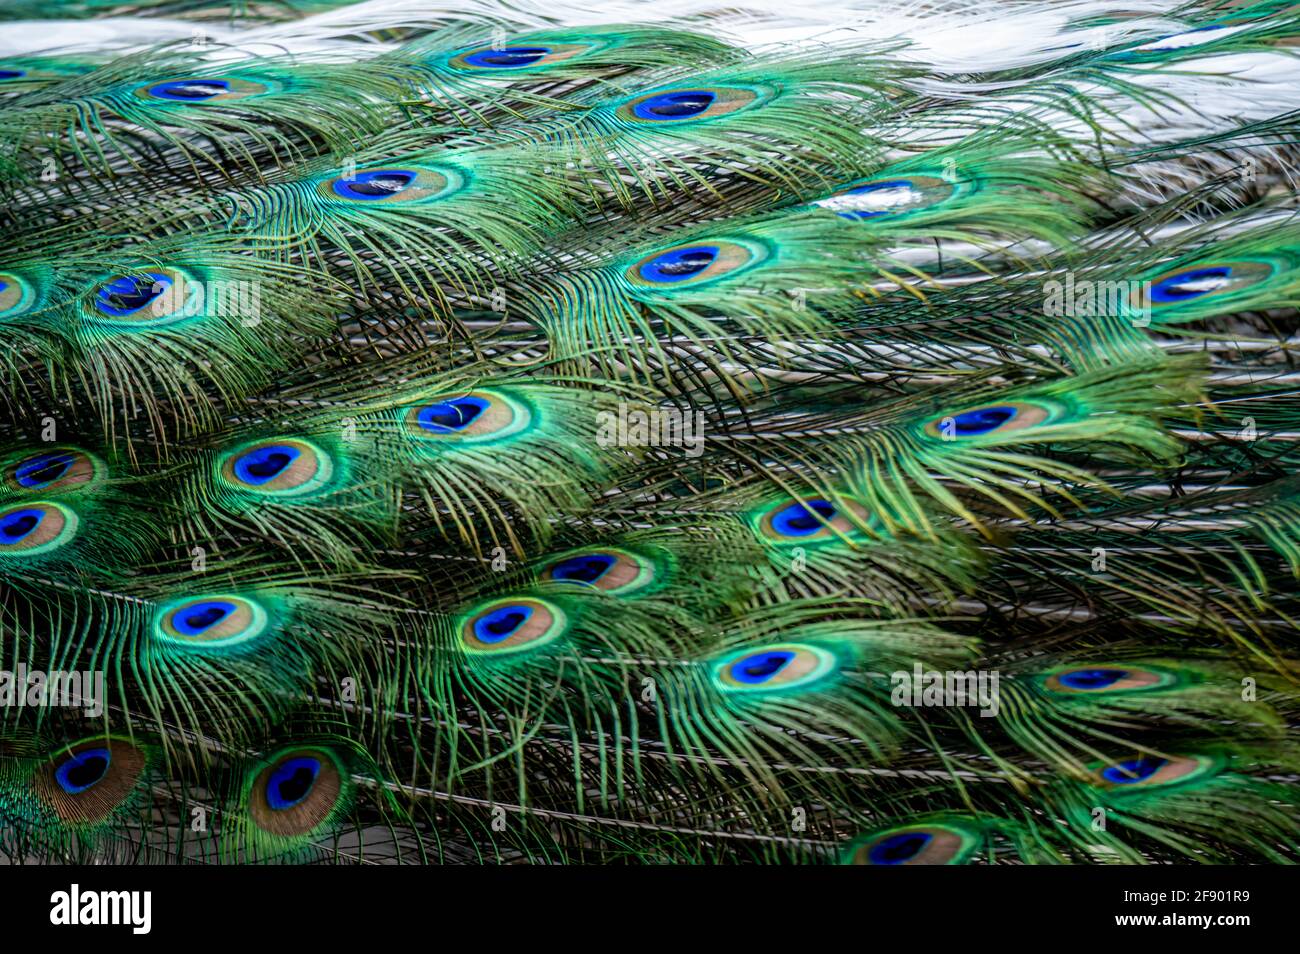 Peacock feather close up. Male Indian peafowl. Metallic blue and green plumage. Quill feathers. Natural pattern with eyespots. Beauty in nature. Stock Photo